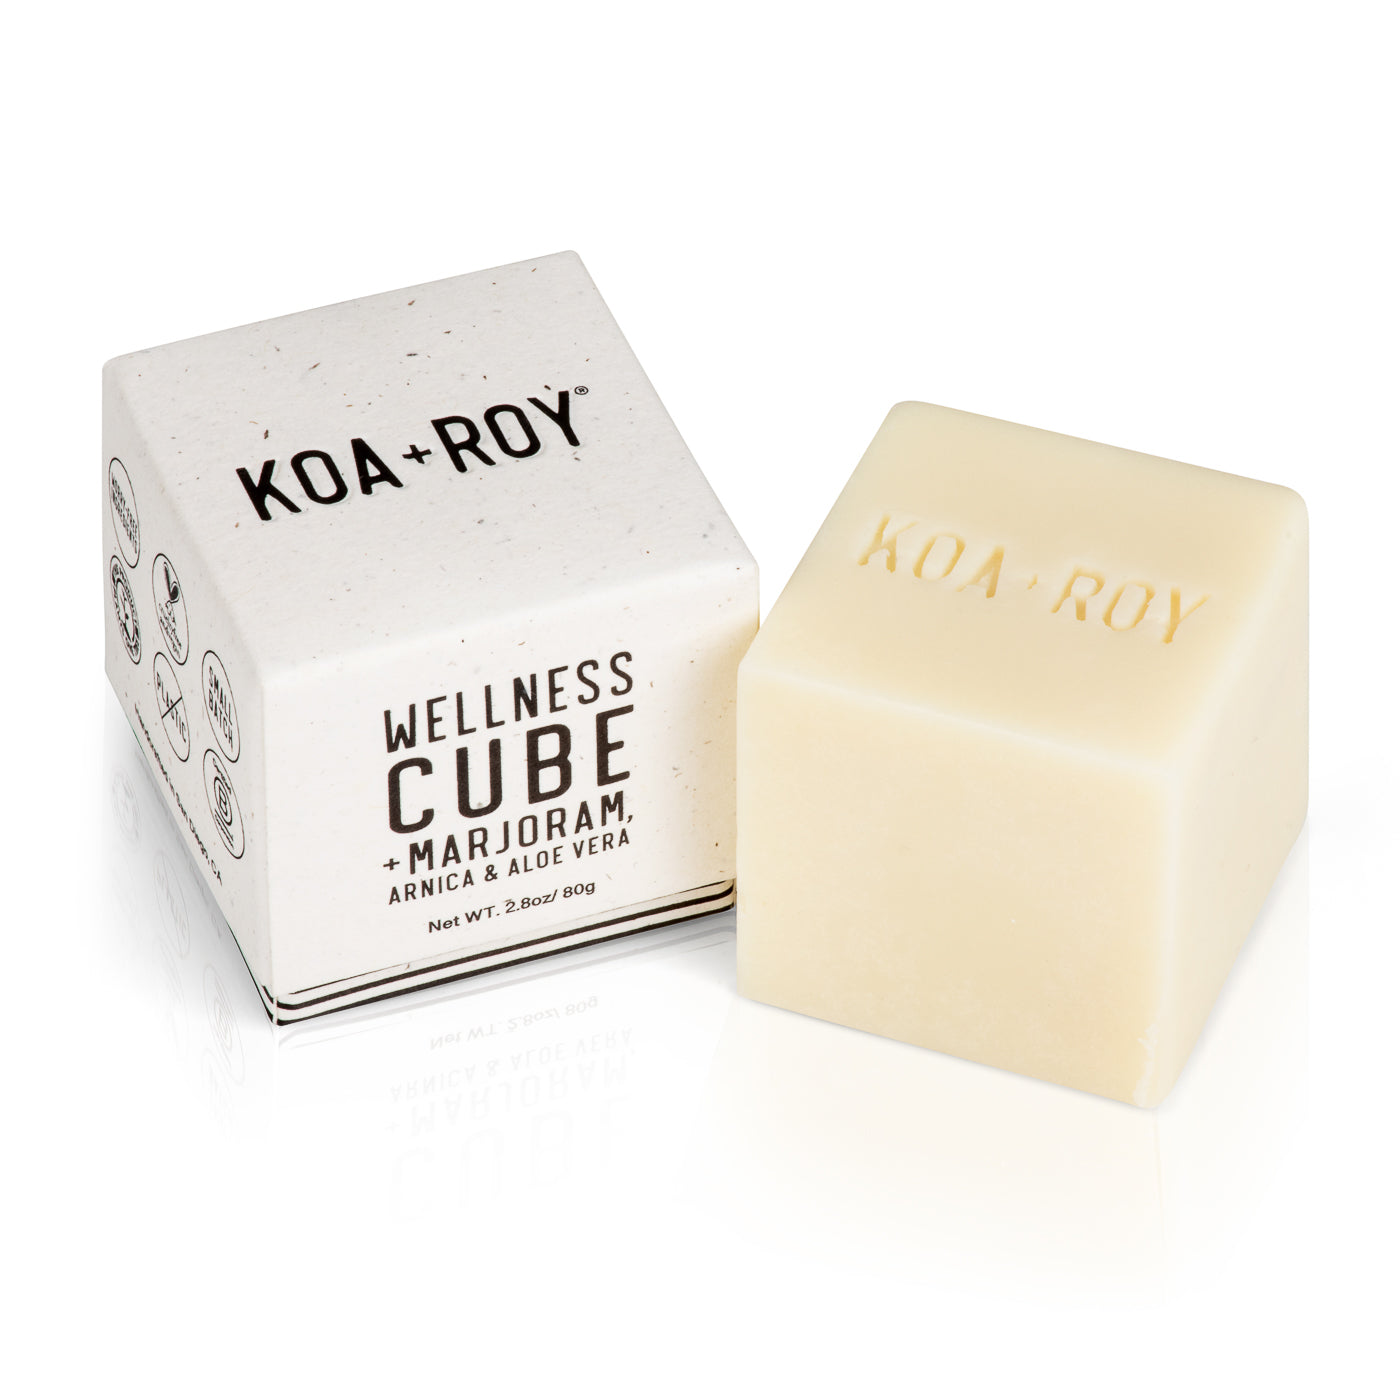 Wellness Cube packaging and body care cube